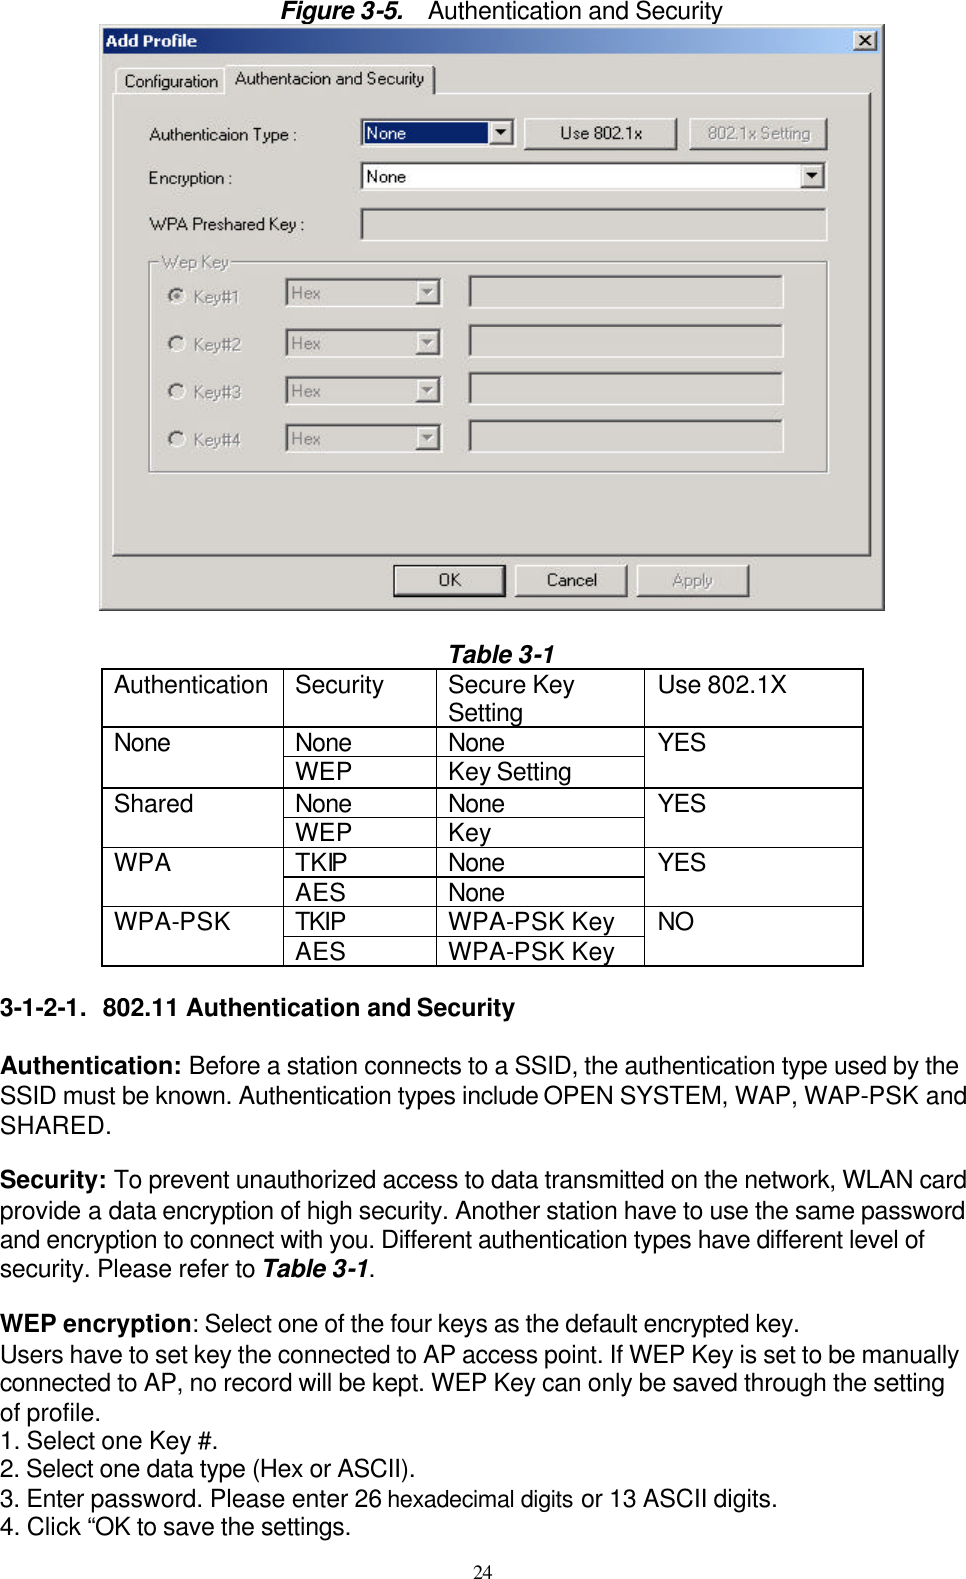 24  Figure 3-5.   Authentication and Security   Table 3-1 Authentication Security Secure Key Setting Use 802.1X None None None WEP Key Setting YES None None Shared WEP Key    YES TKIP None WPA AES None YES TKIP WPA-PSK Key WPA-PSK AES WPA-PSK Key NO  3-1-2-1. 802.11 Authentication and Security  Authentication: Before a station connects to a SSID, the authentication type used by the SSID must be known. Authentication types include OPEN SYSTEM, WAP, WAP-PSK and SHARED.  Security: To prevent unauthorized access to data transmitted on the network, WLAN card provide a data encryption of high security. Another station have to use the same password and encryption to connect with you. Different authentication types have different level of security. Please refer to Table 3-1.  WEP encryption: Select one of the four keys as the default encrypted key. Users have to set key the connected to AP access point. If WEP Key is set to be manually connected to AP, no record will be kept. WEP Key can only be saved through the setting of profile. 1. Select one Key #. 2. Select one data type (Hex or ASCII). 3. Enter password. Please enter 26 hexadecimal digits or 13 ASCII digits. 4. Click “OK to save the settings. 